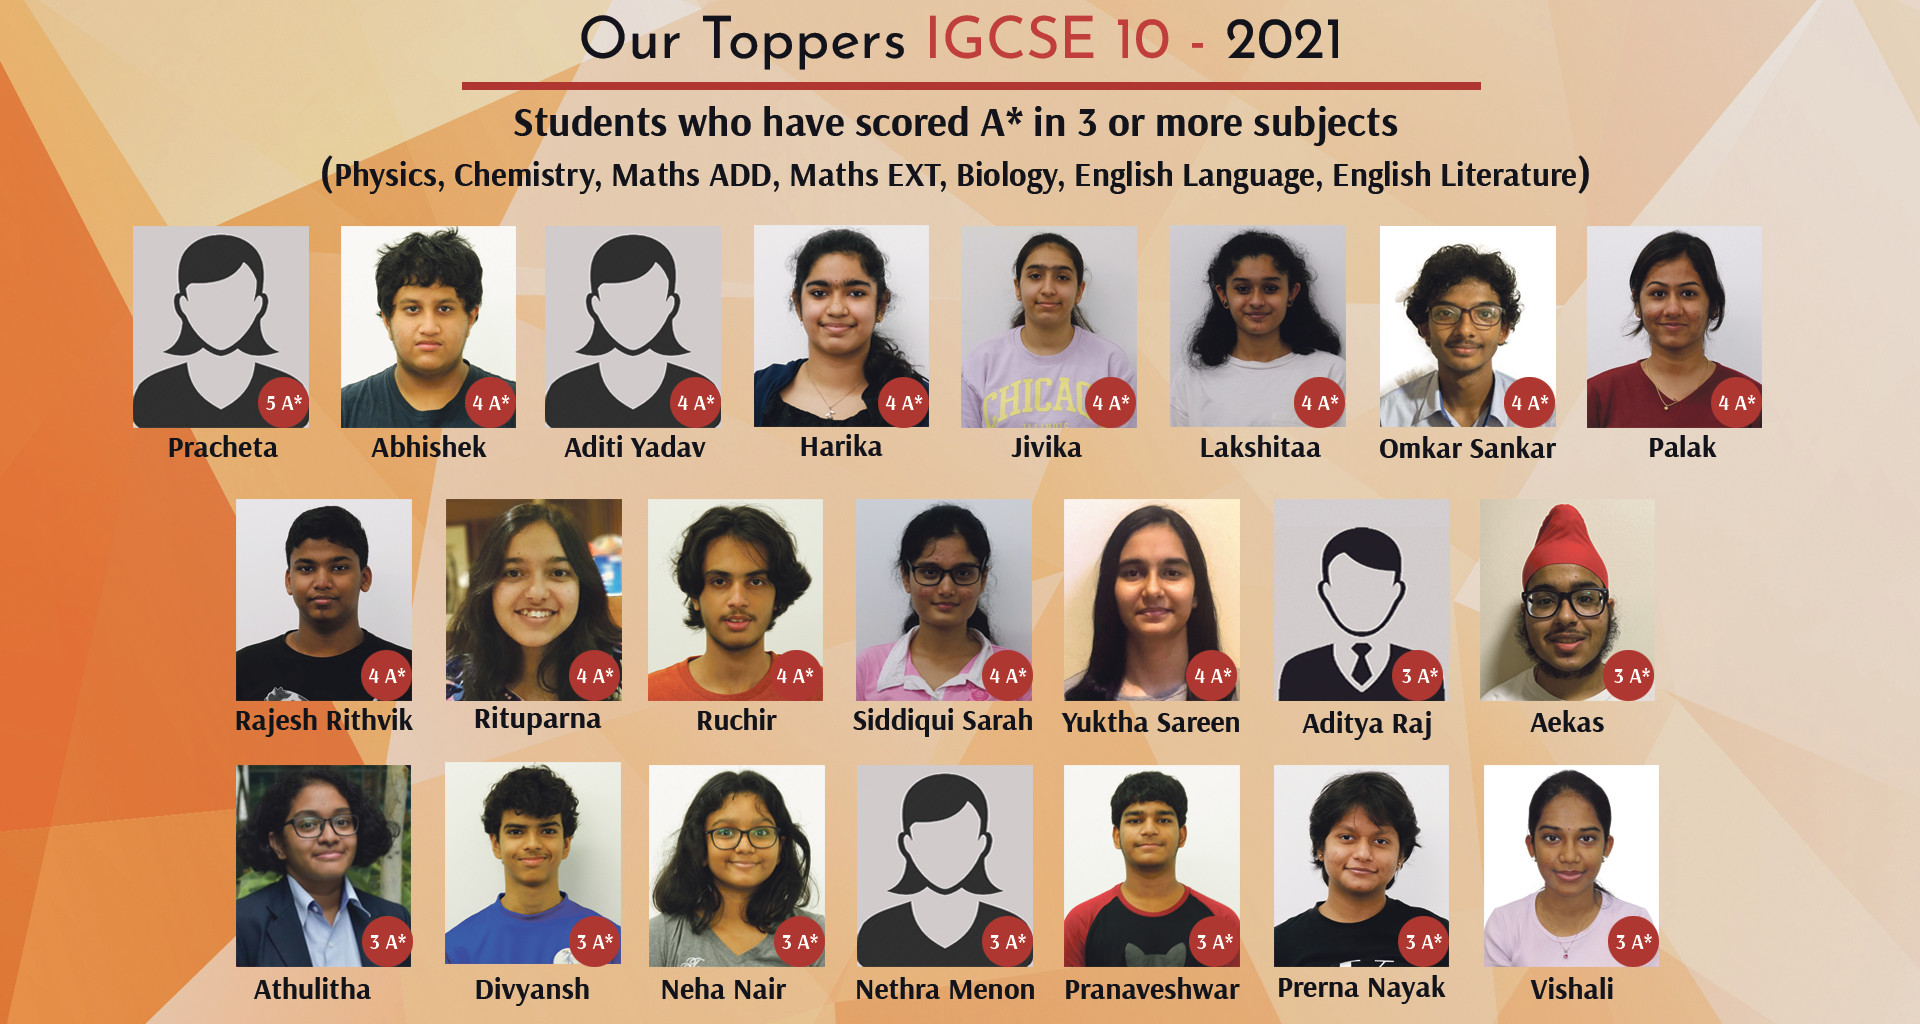 IGCSE 10 Toppers - 2021